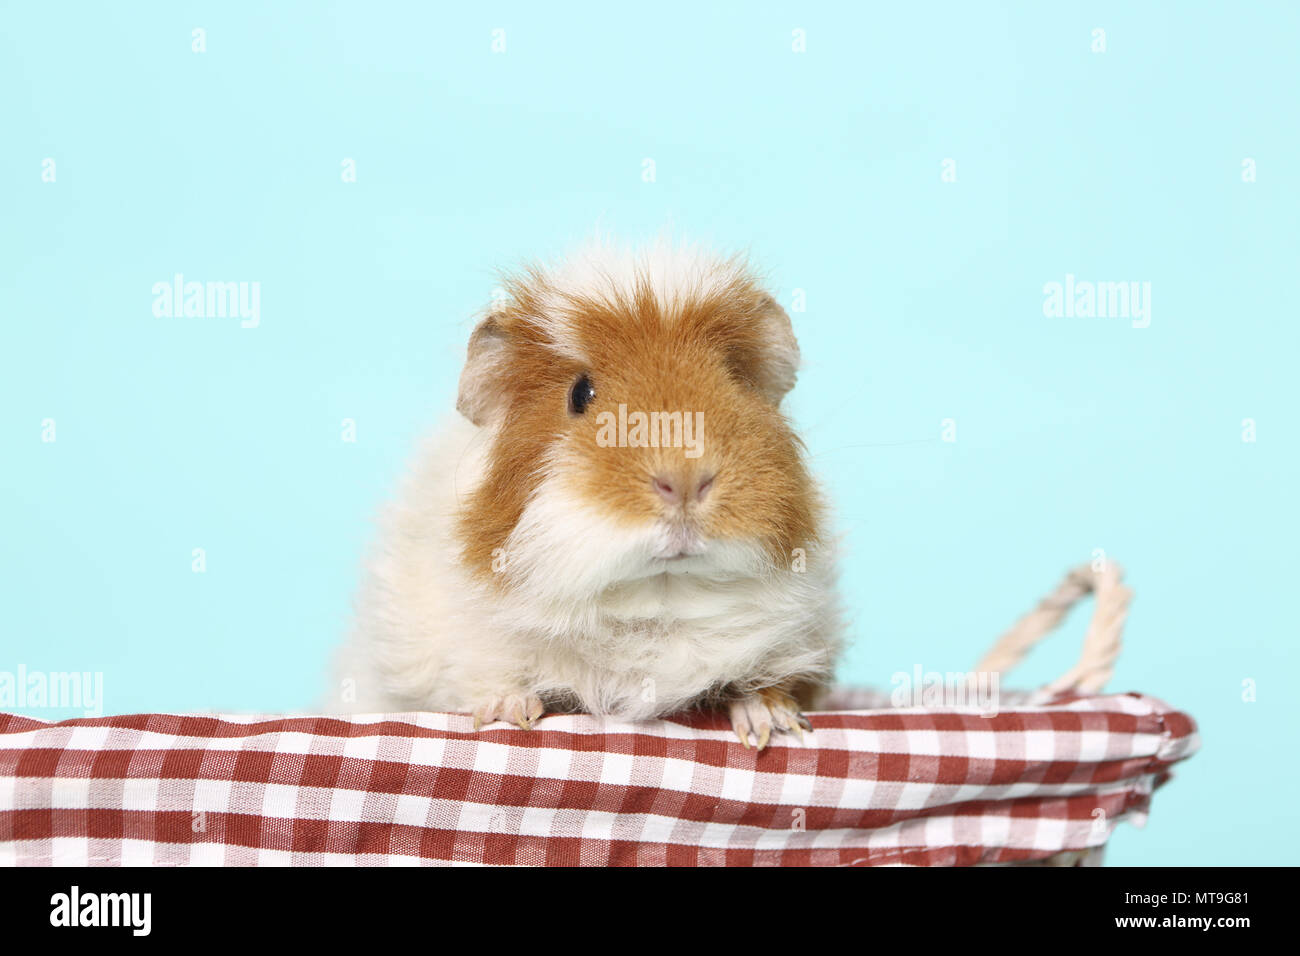 US-Teddy Guinea Pig in a basket. Studio picture against a light blue background Stock Photo